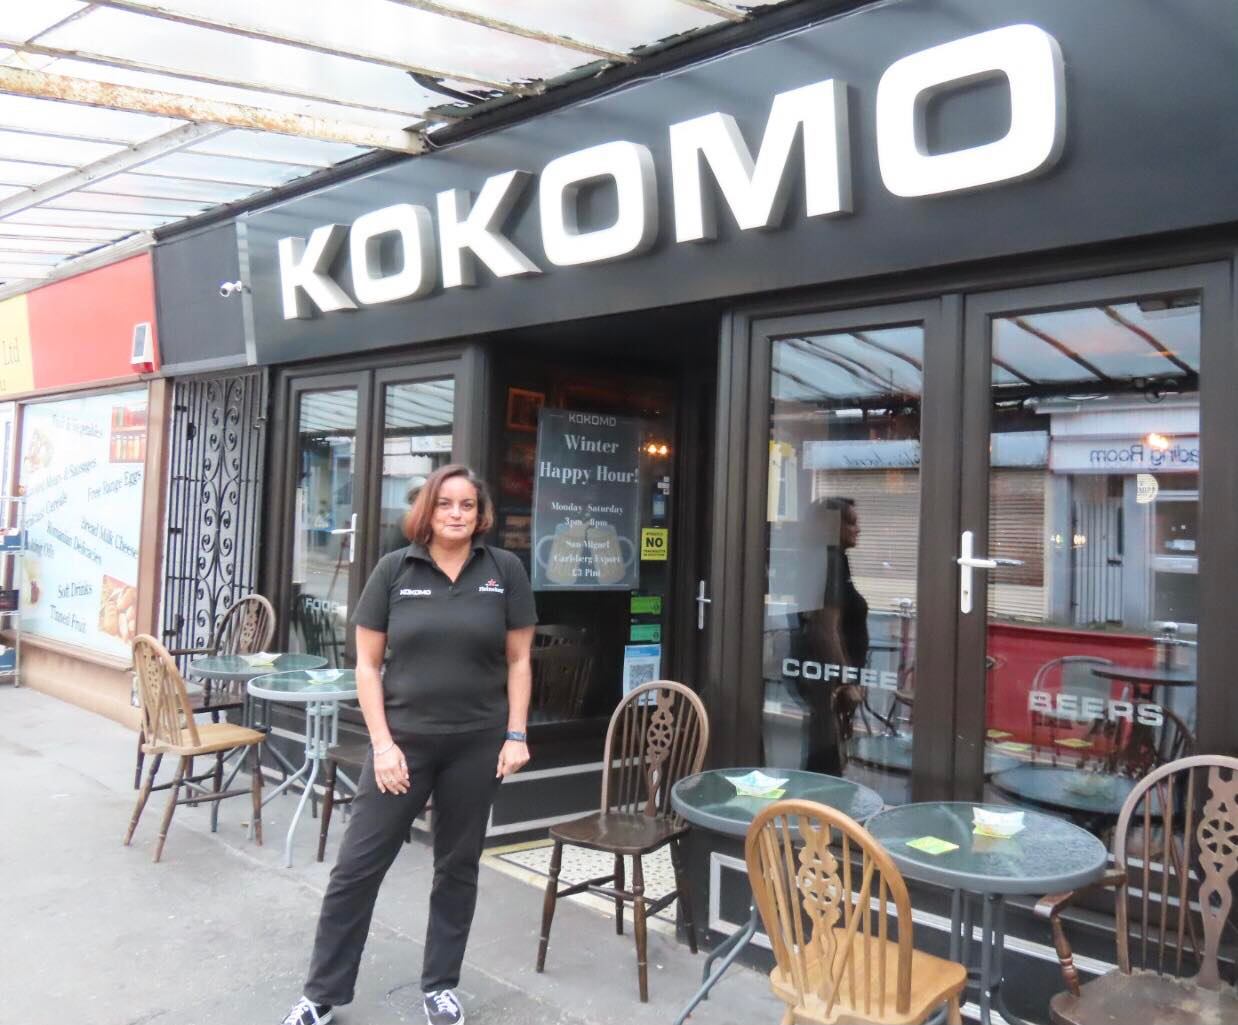 Owner Kelly Carr at Kokomo Coffee & Wine Bar on Bold Street in Southport. Photo by Andrew Brown Media